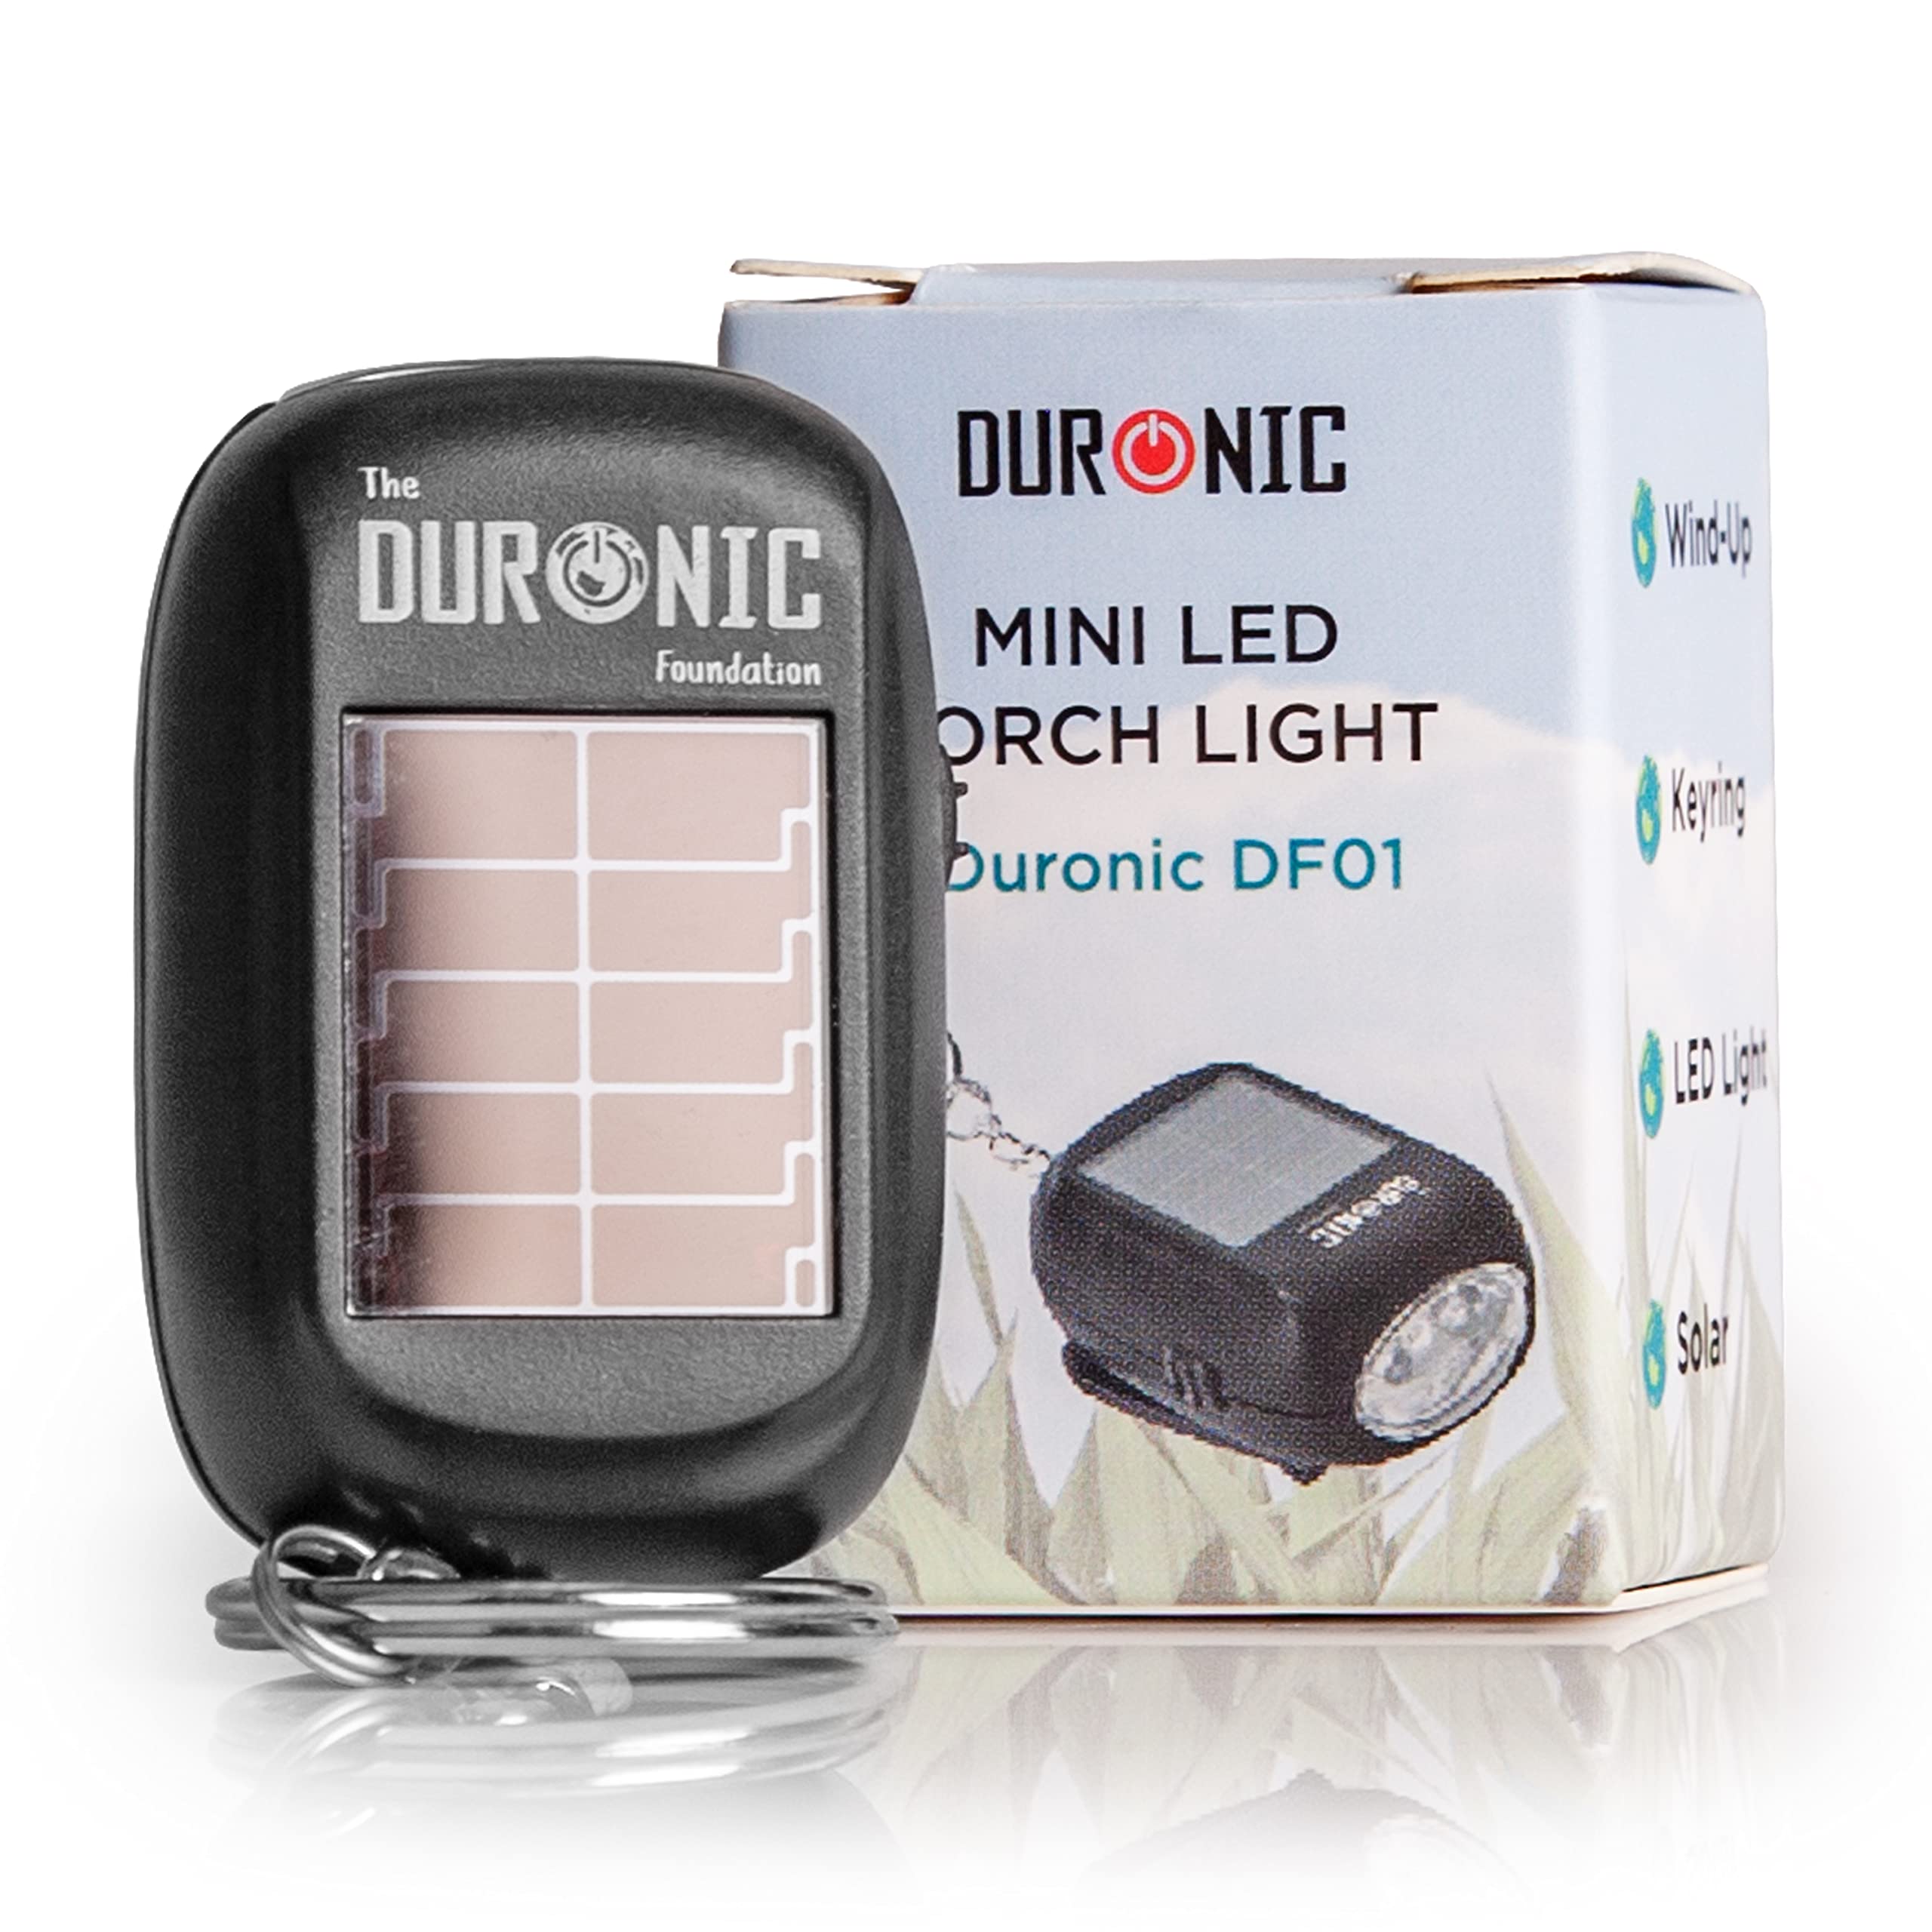 Duronic Keyring LED Torch DF01, Pocket Flashlight, 2-Way Charging - Wind Up and Solar Panel, Eco, Crank Handle Rechargeable, 8 Lumens, Dynamo Keychain Light, No Batteries Needed